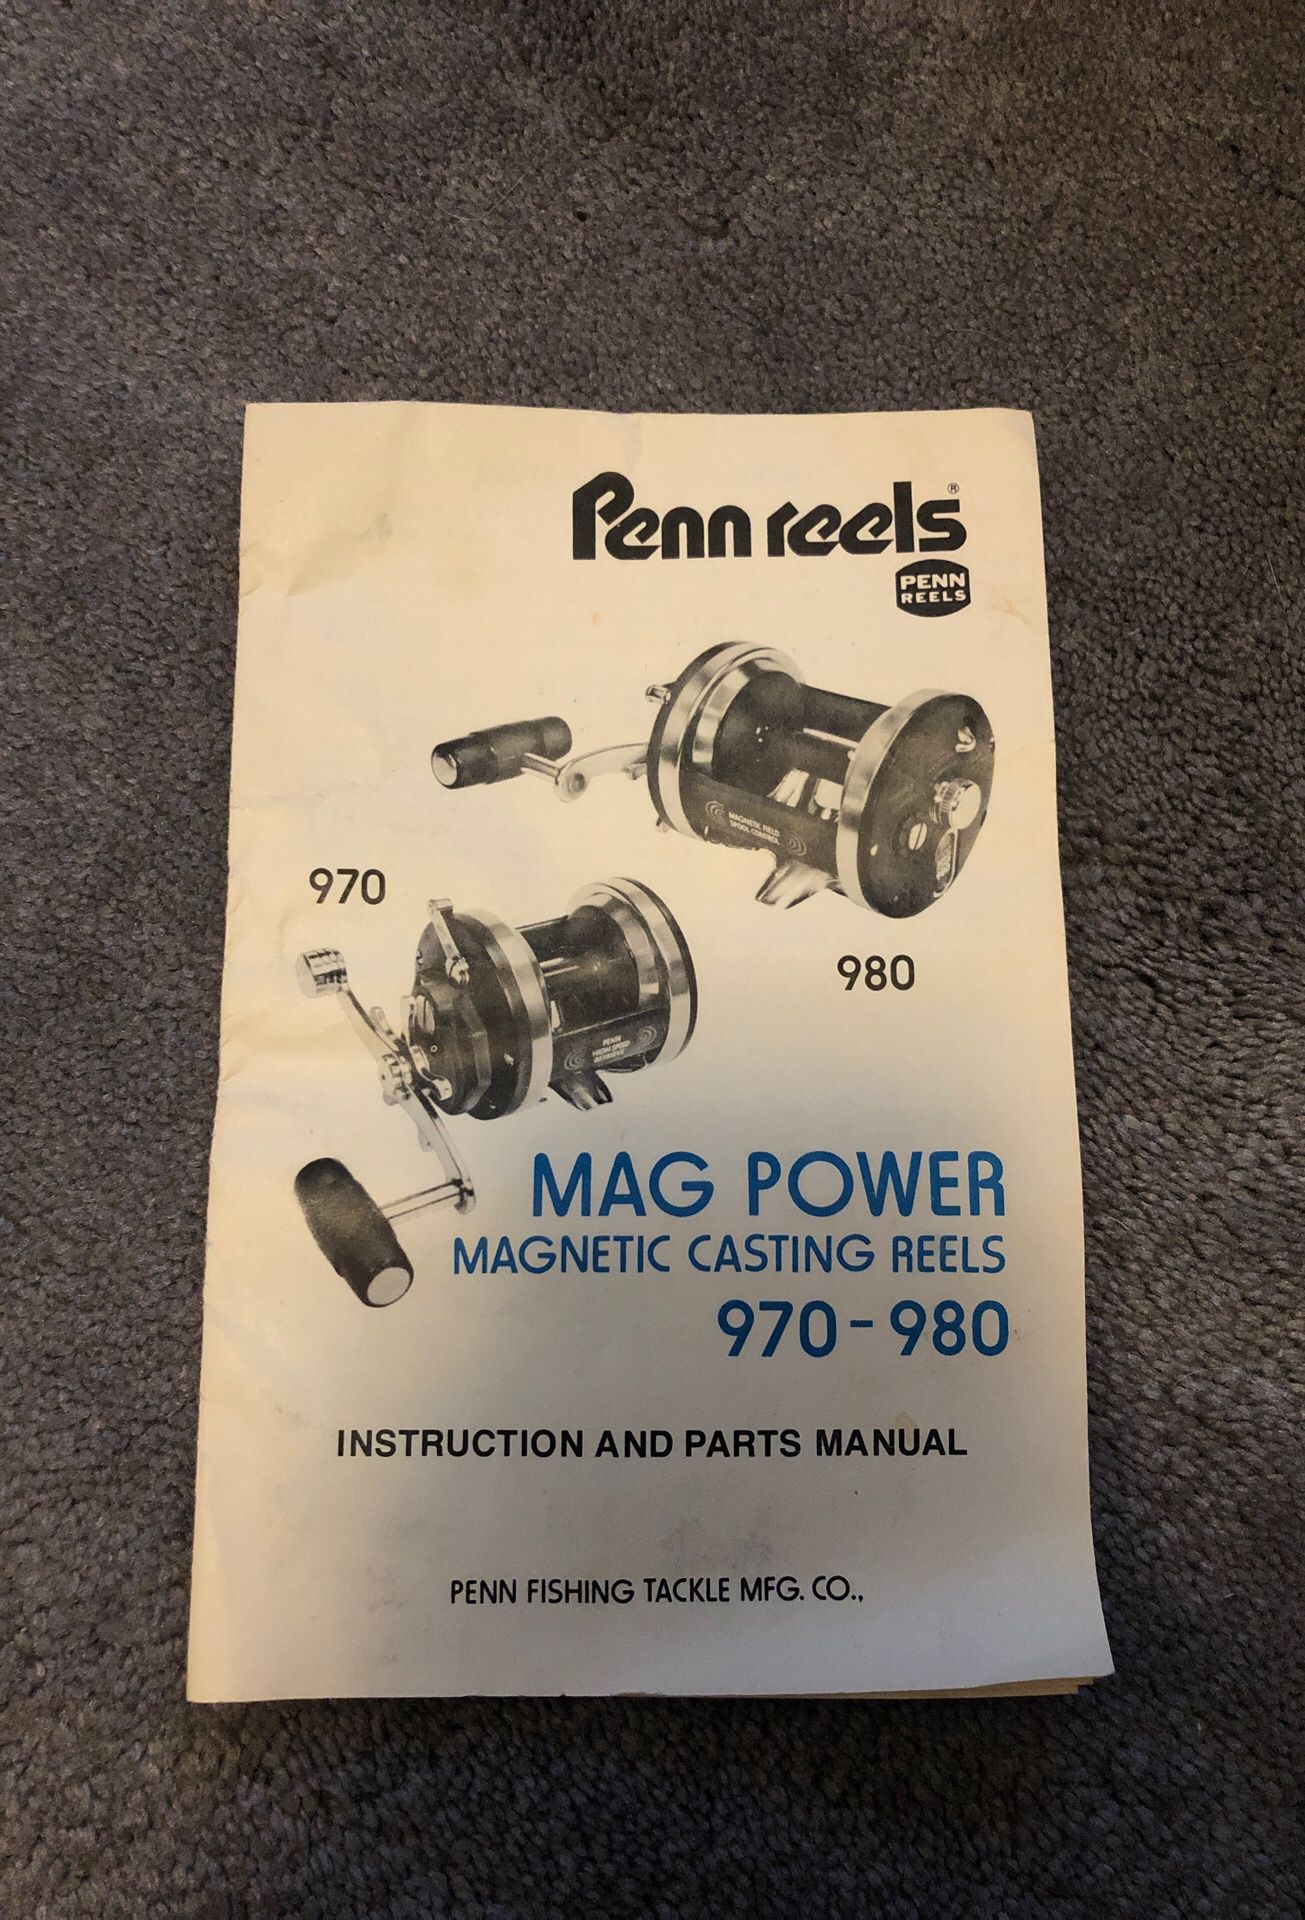 SOLD*Penn Mag Power 980 WITH original box and accessories